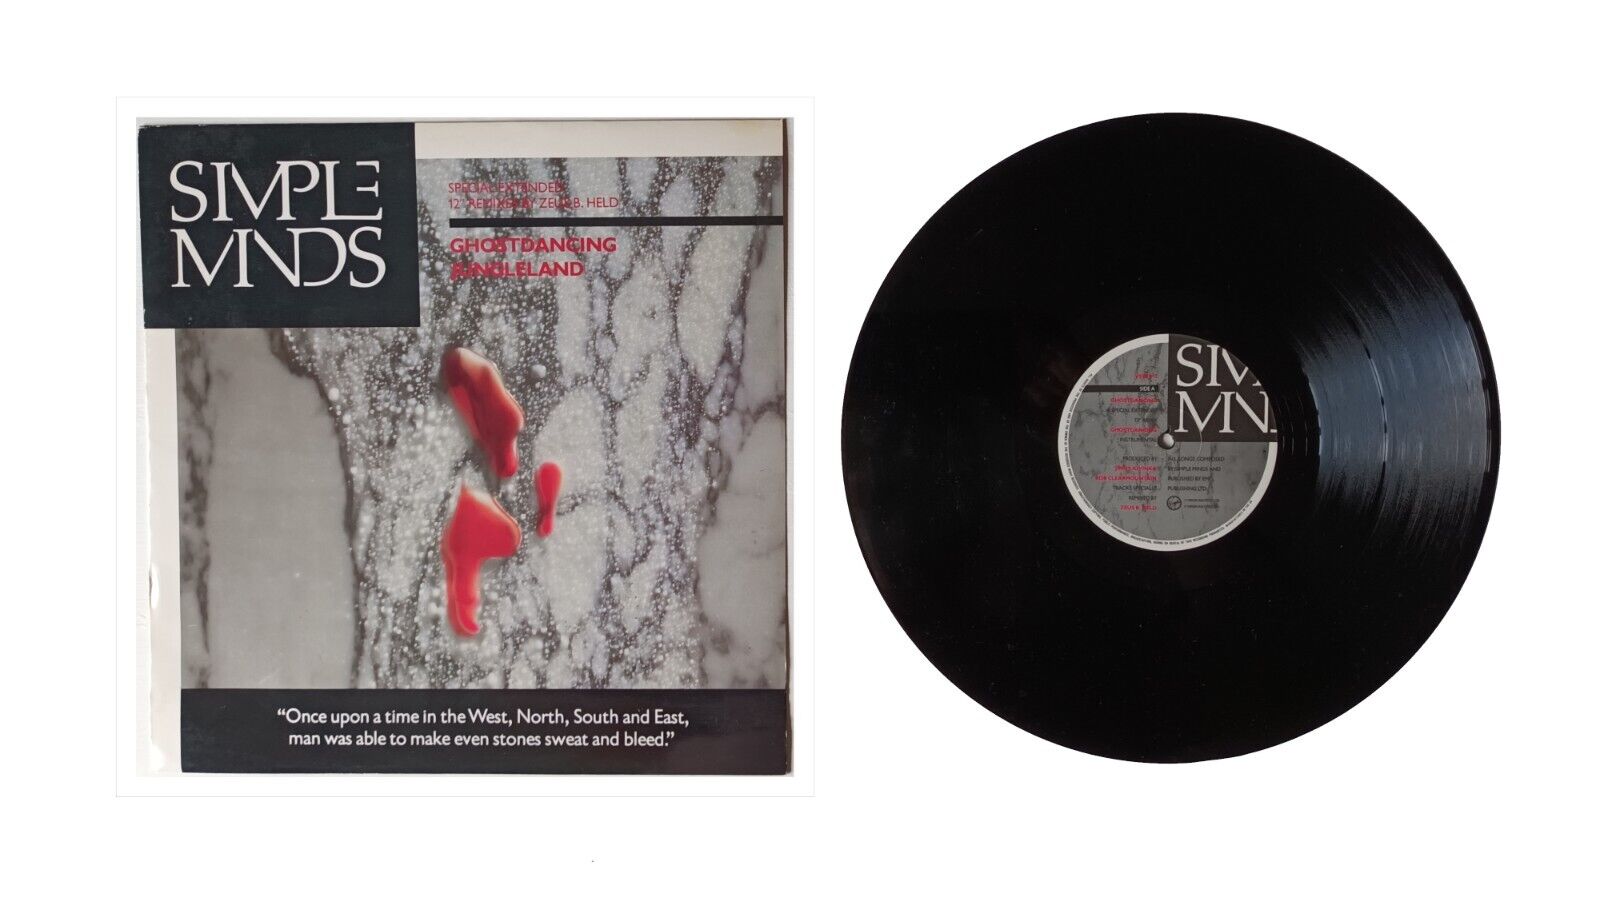 Simple Minds - Ghostdancing (extended remix) 12-inch Single with Picture Sleeve 